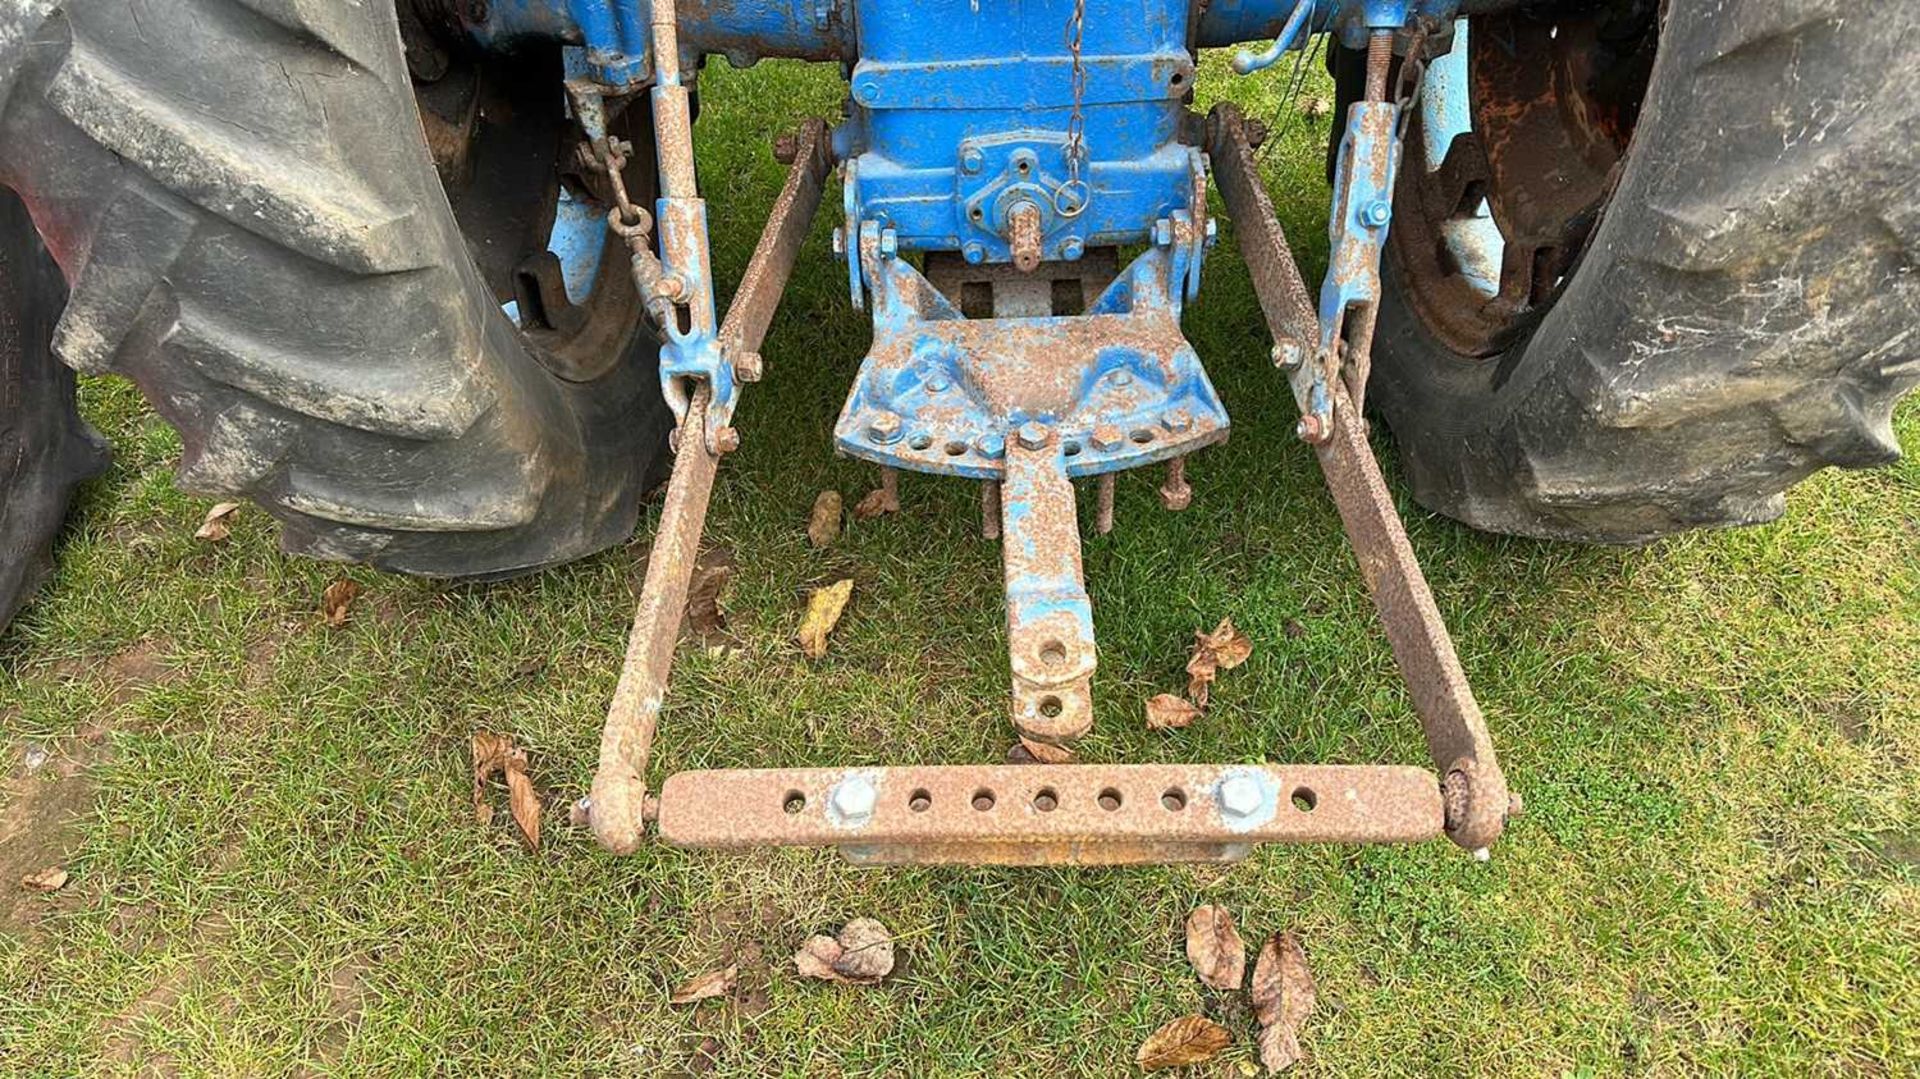 A Fordson Tractor with front loader arms, requiring full restoration - Bild 13 aus 14